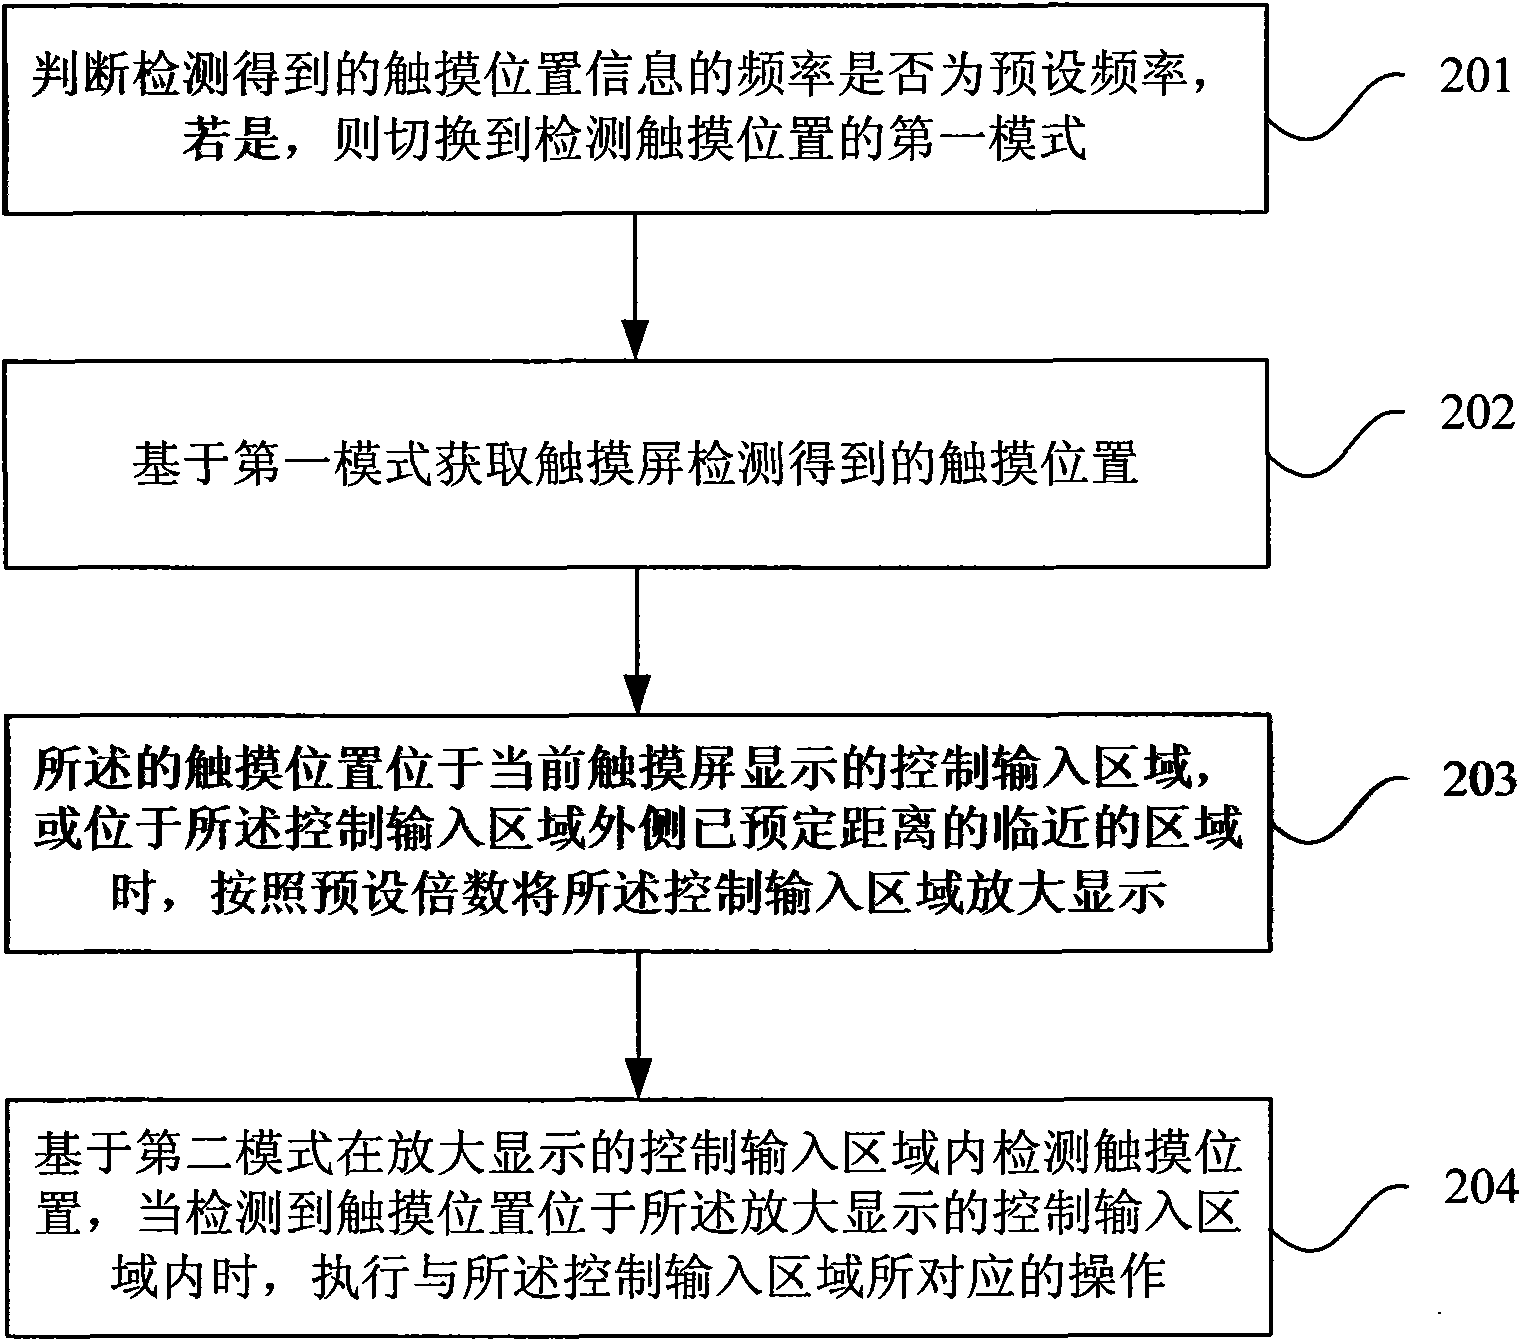 Method and device for inputting position information and displaying information matching